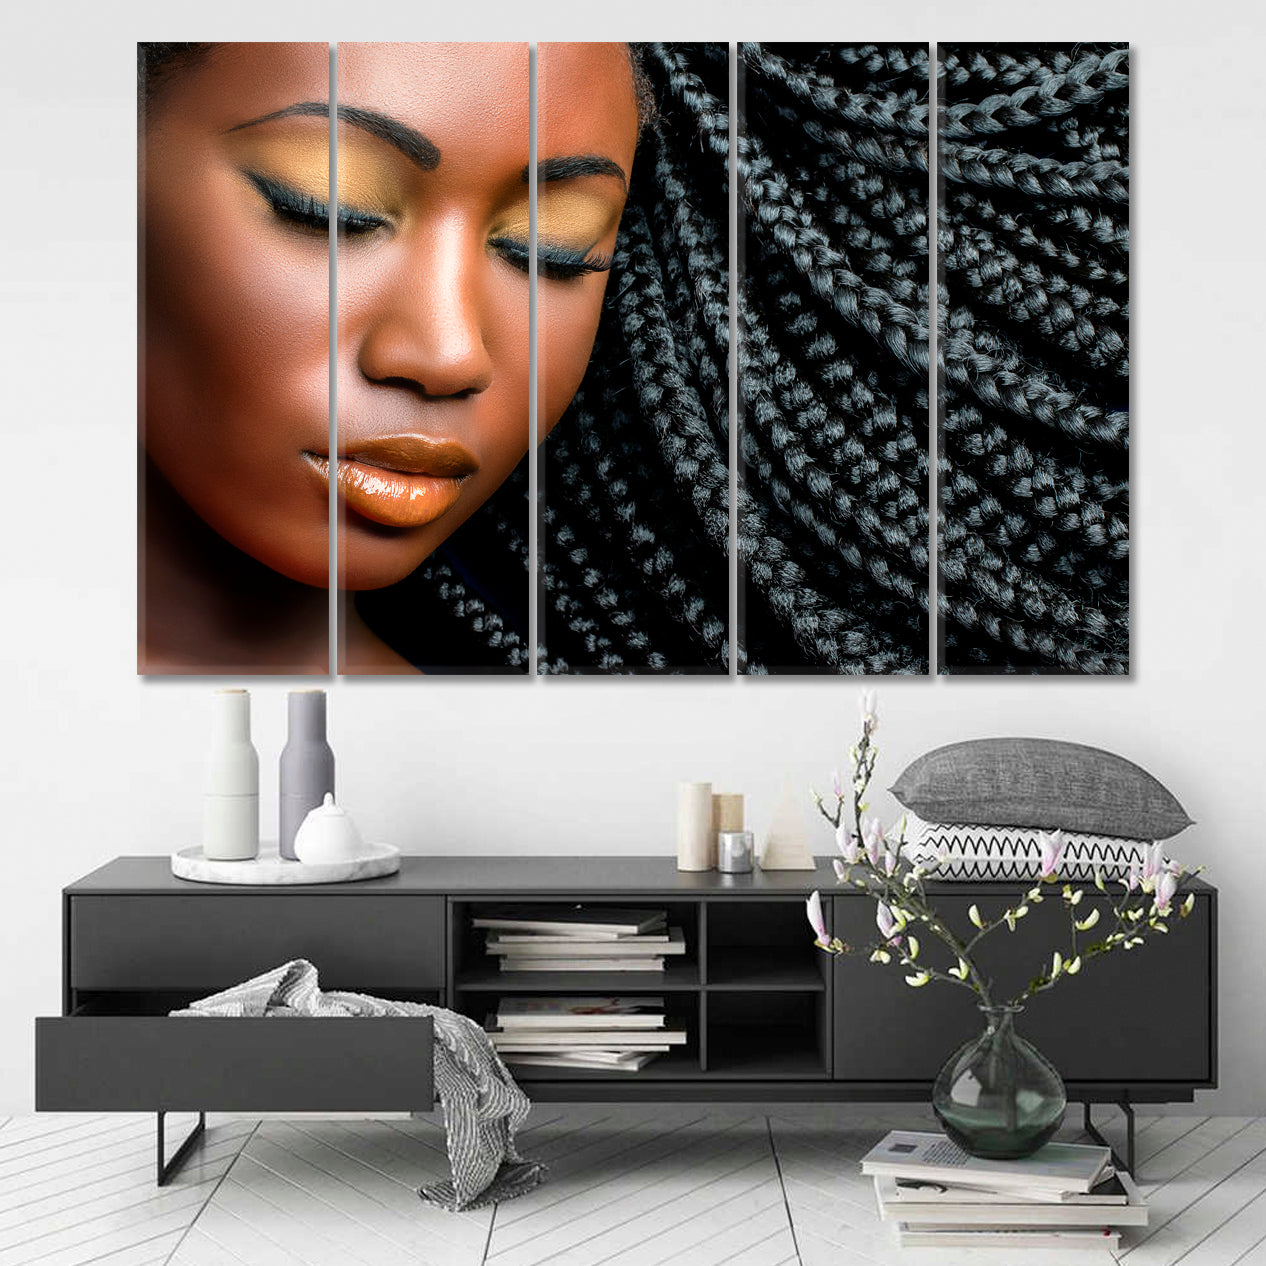 BEAUTY African Girl Professional Makeup Black Braided Hairstyle Beauty Salon Artwork Prints Artesty 5 panels 36" x 24" 